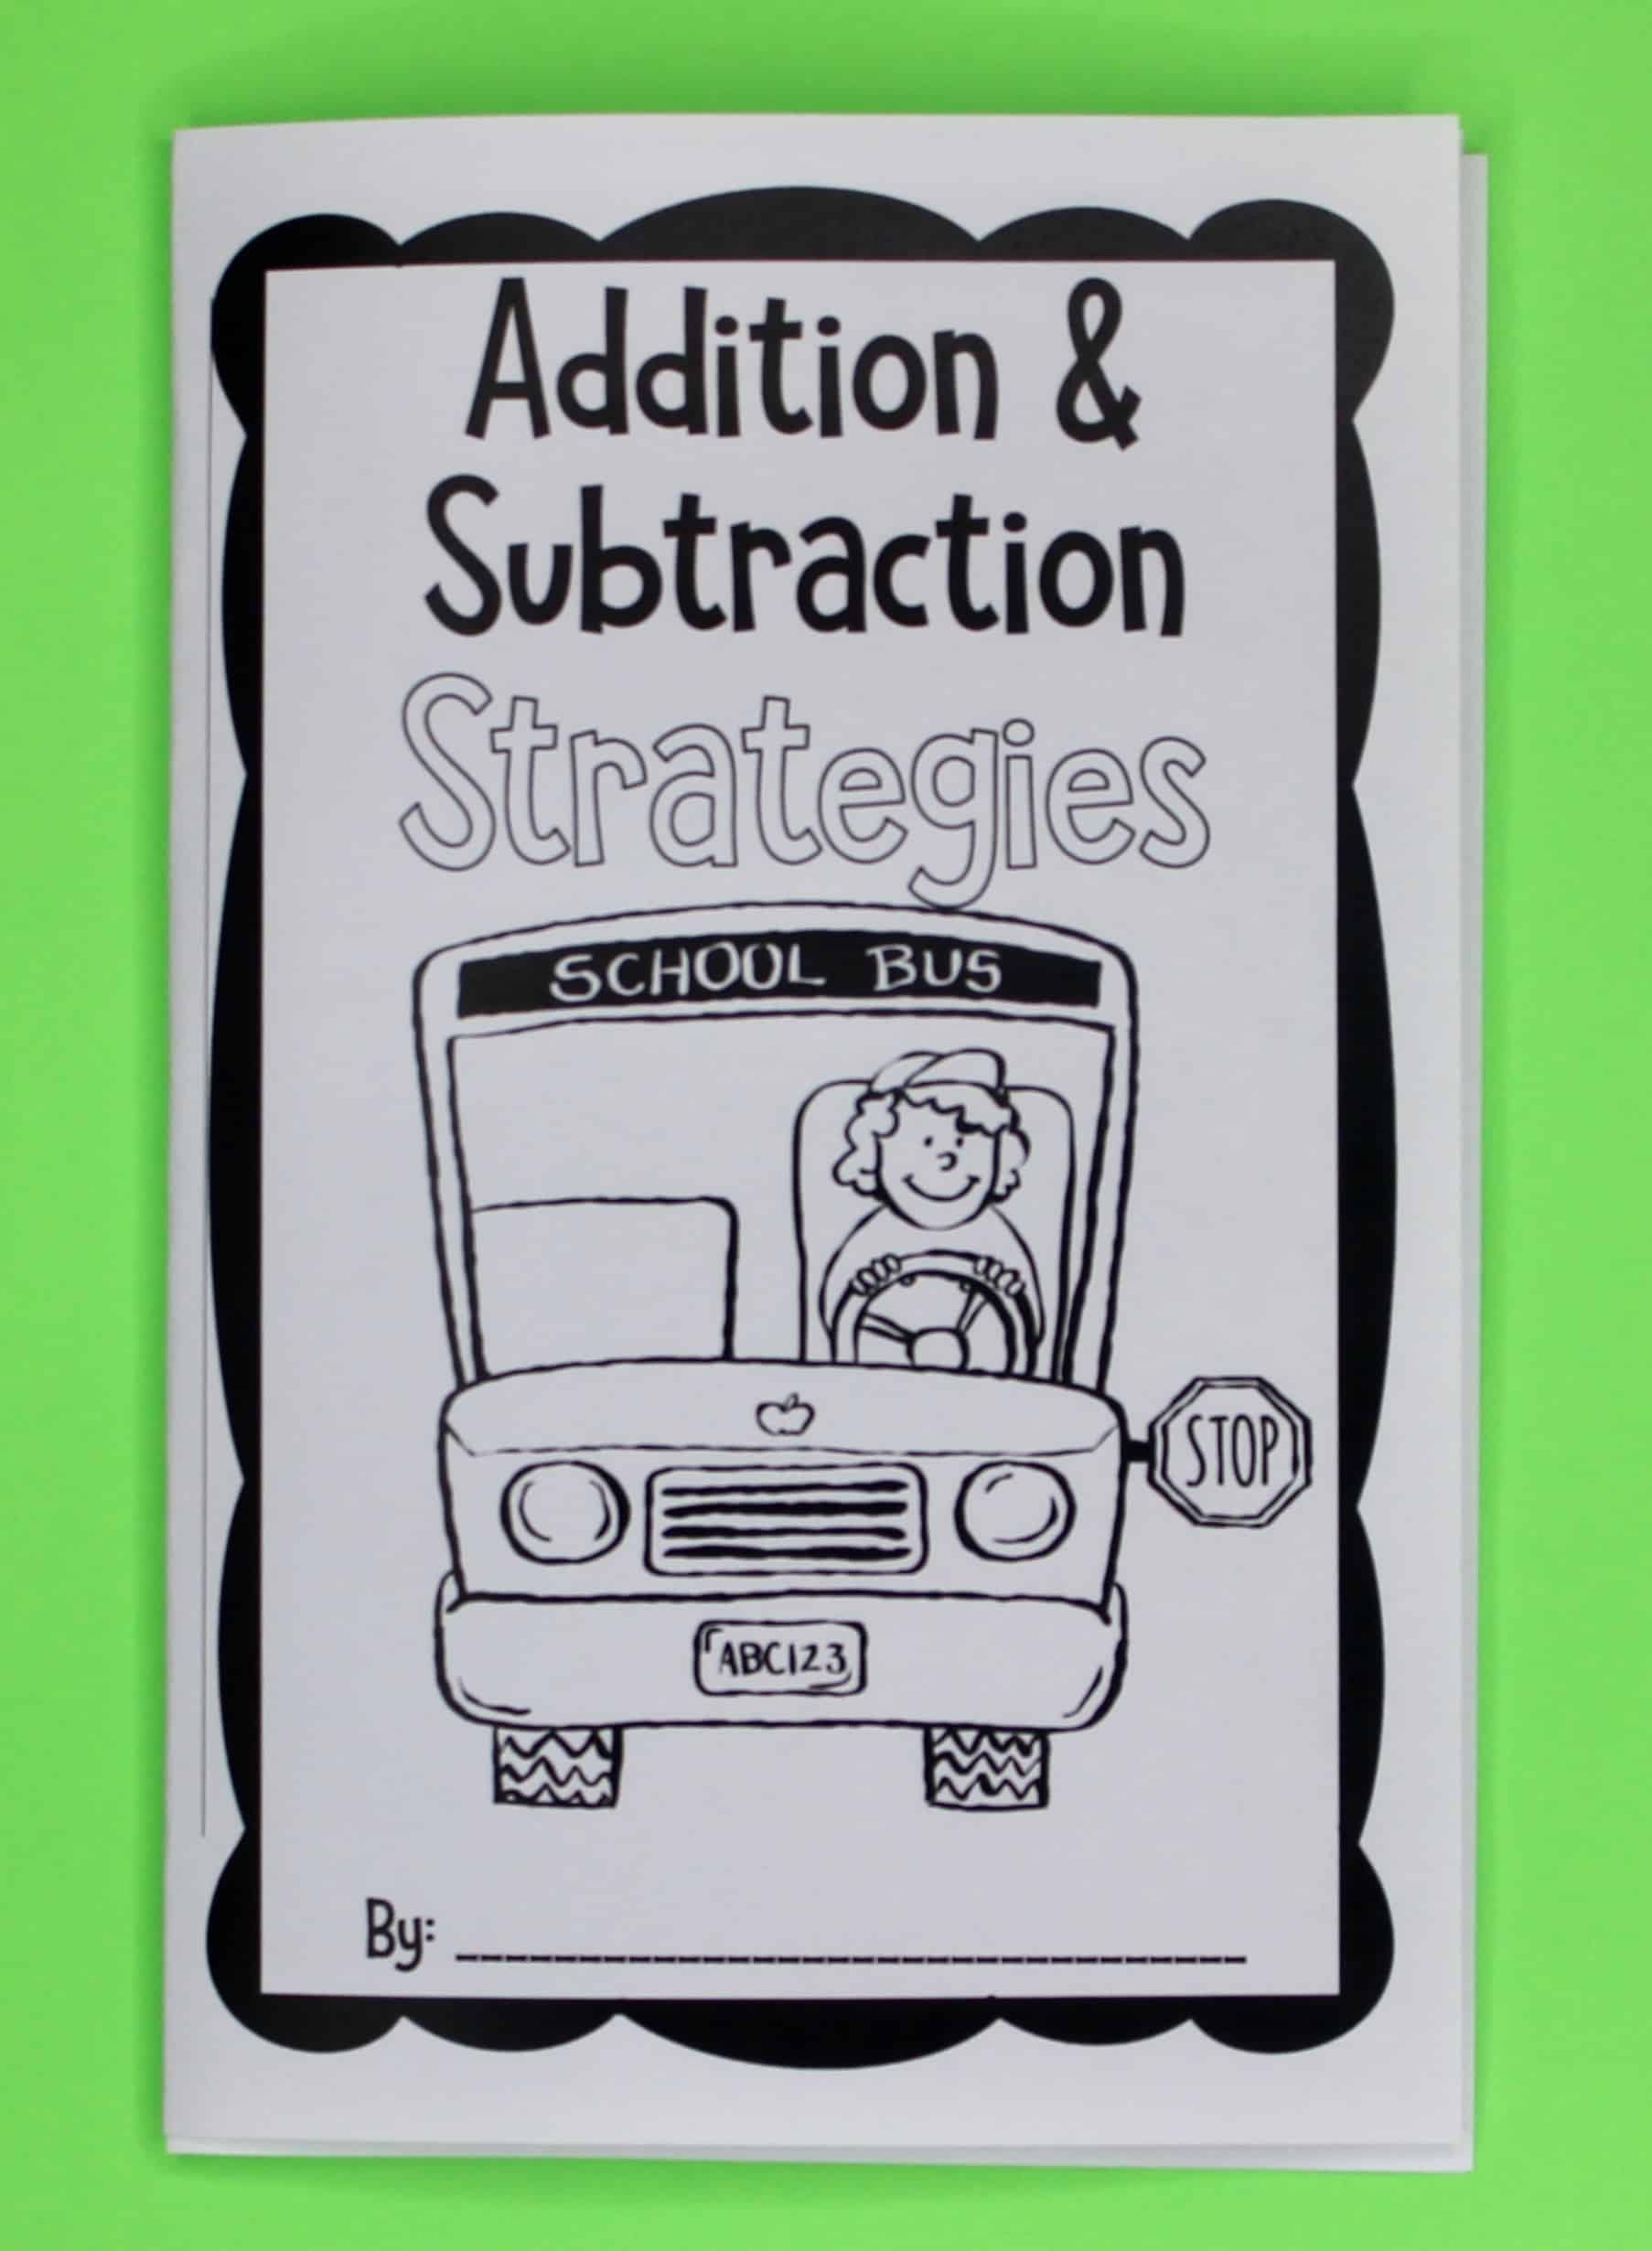 Spending time teaching addition and subtraction in 3rd grade or other upper elementary grades is important, but sometimes we can find ourselves spending too much time on it. This blog post explains how I use my addition and subtraction unit to make sure students have a conceptual understanding before we move on to other math concepts. Click through to read the post!